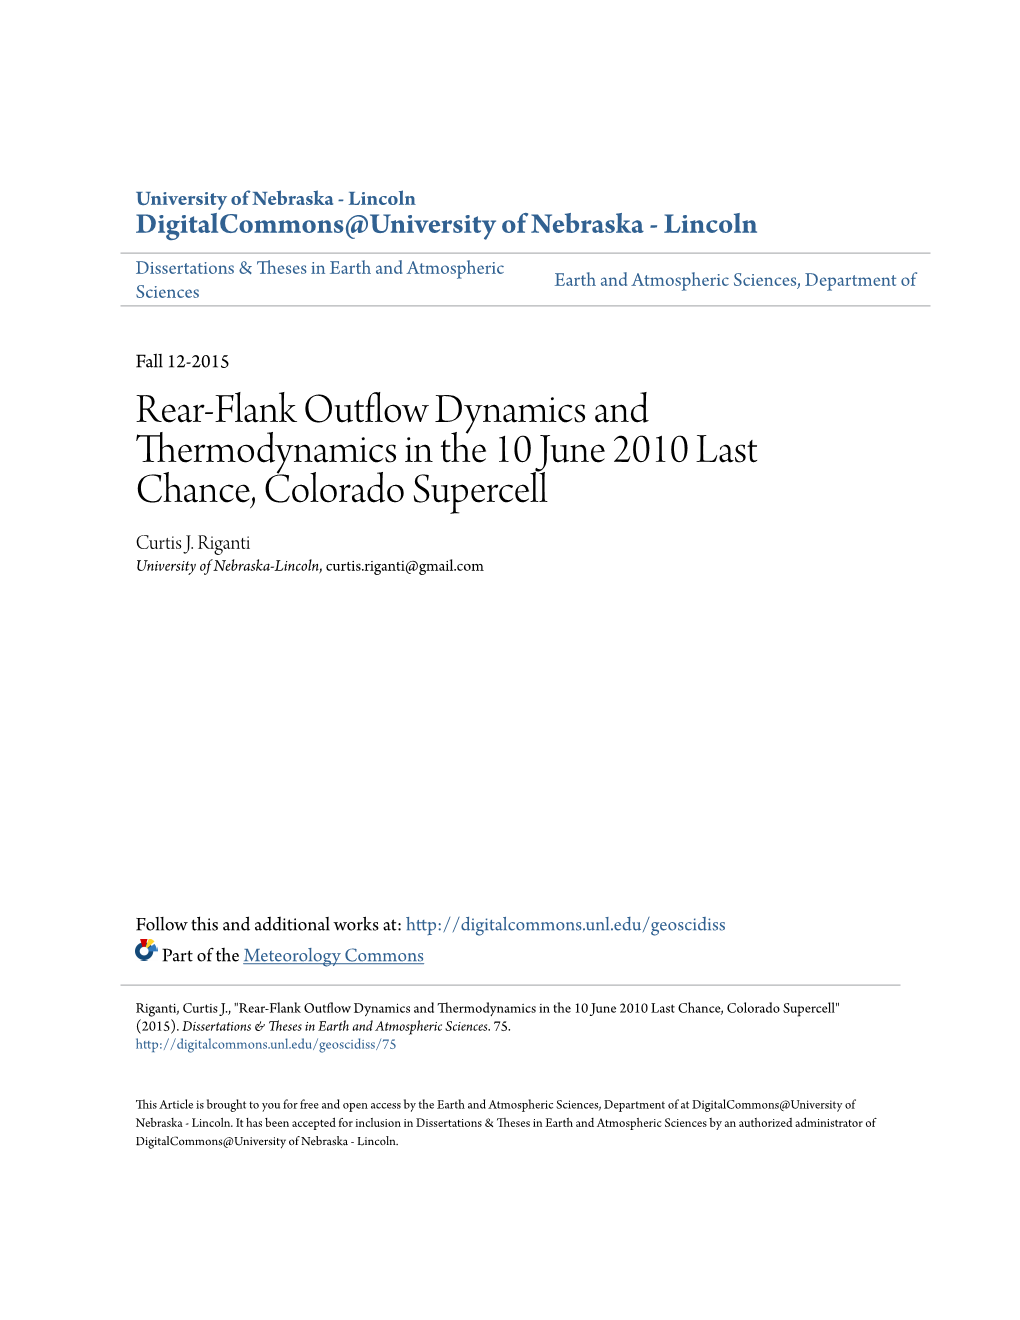 Rear-Flank Outflow Dynamics and Thermodynamics in the 10 June 2010 Last Chance, Colorado Supercell Curtis J